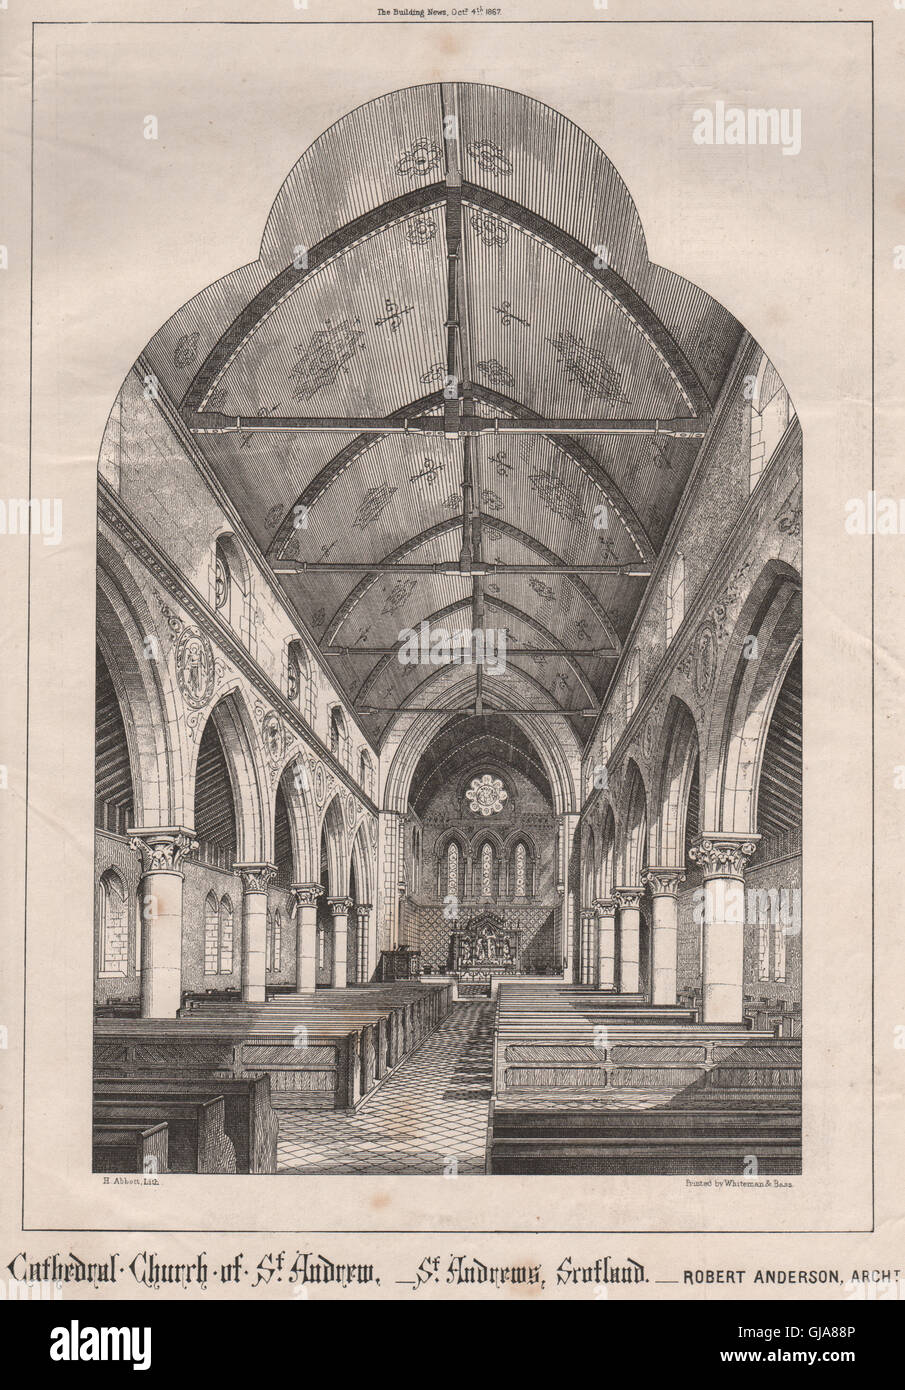 Cathedral Church of St. Andrew, St. Andrews, Scotland; Robert Anderson, 1867 Stock Photo